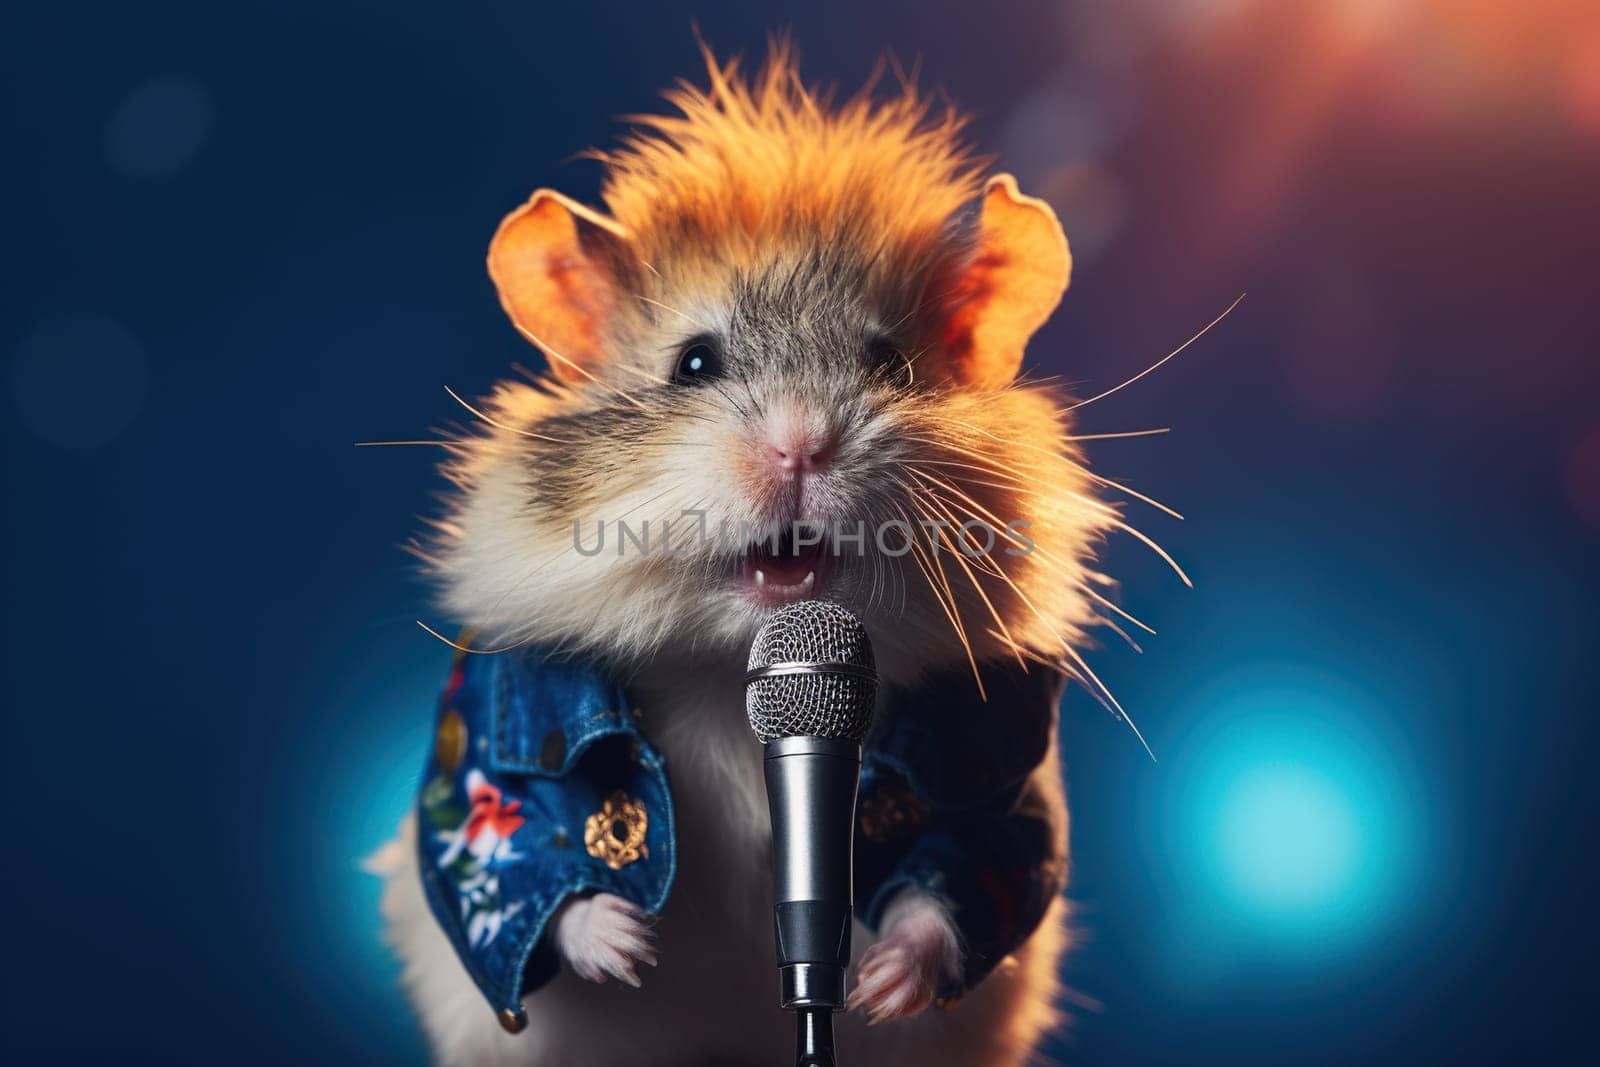 Funny Singer Stylish Hamster Sing In Mic On A Stage by tan4ikk1